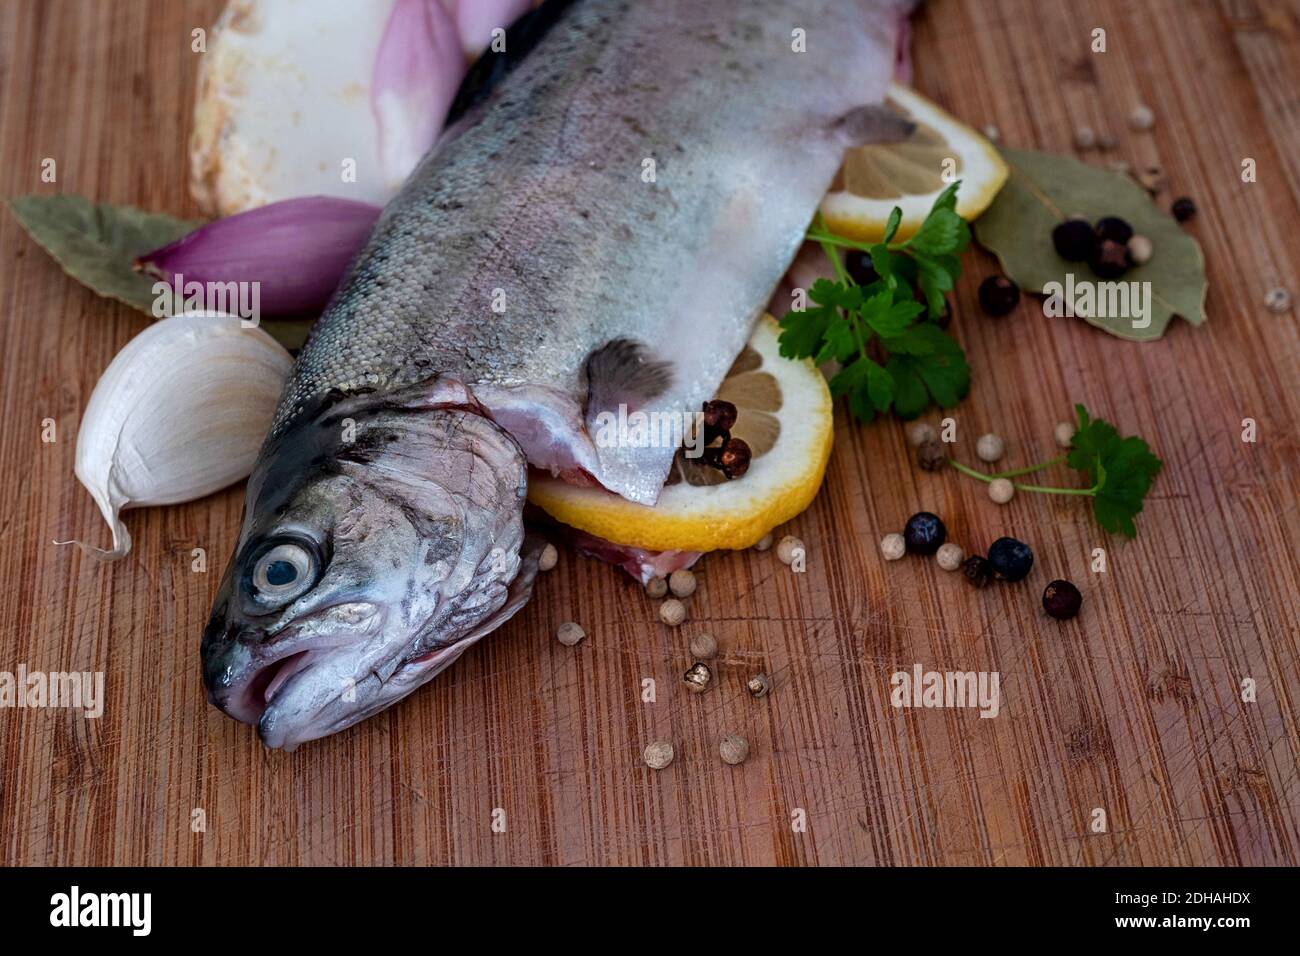 raw trout prepared for cooking Stock Photo